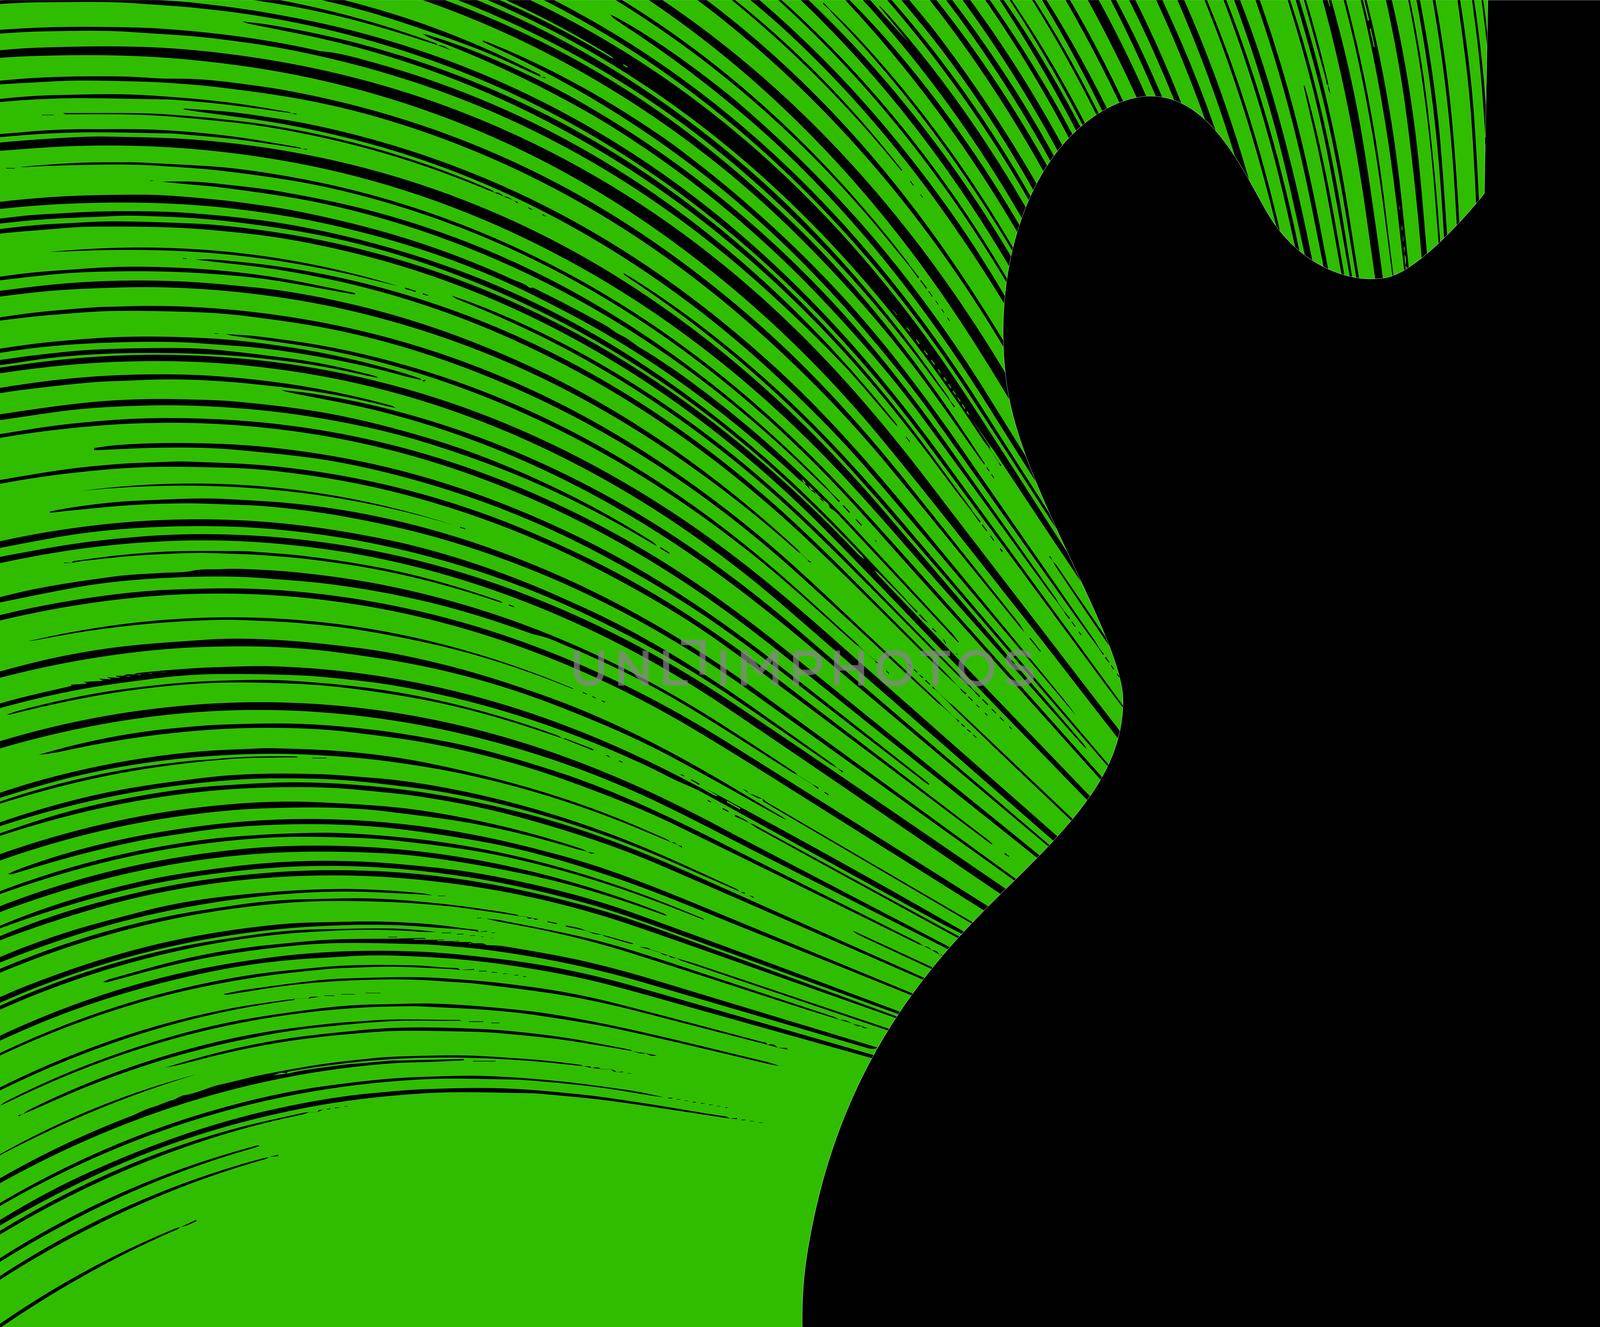 A semi acoustic guitar set on a green background with wave speed lines